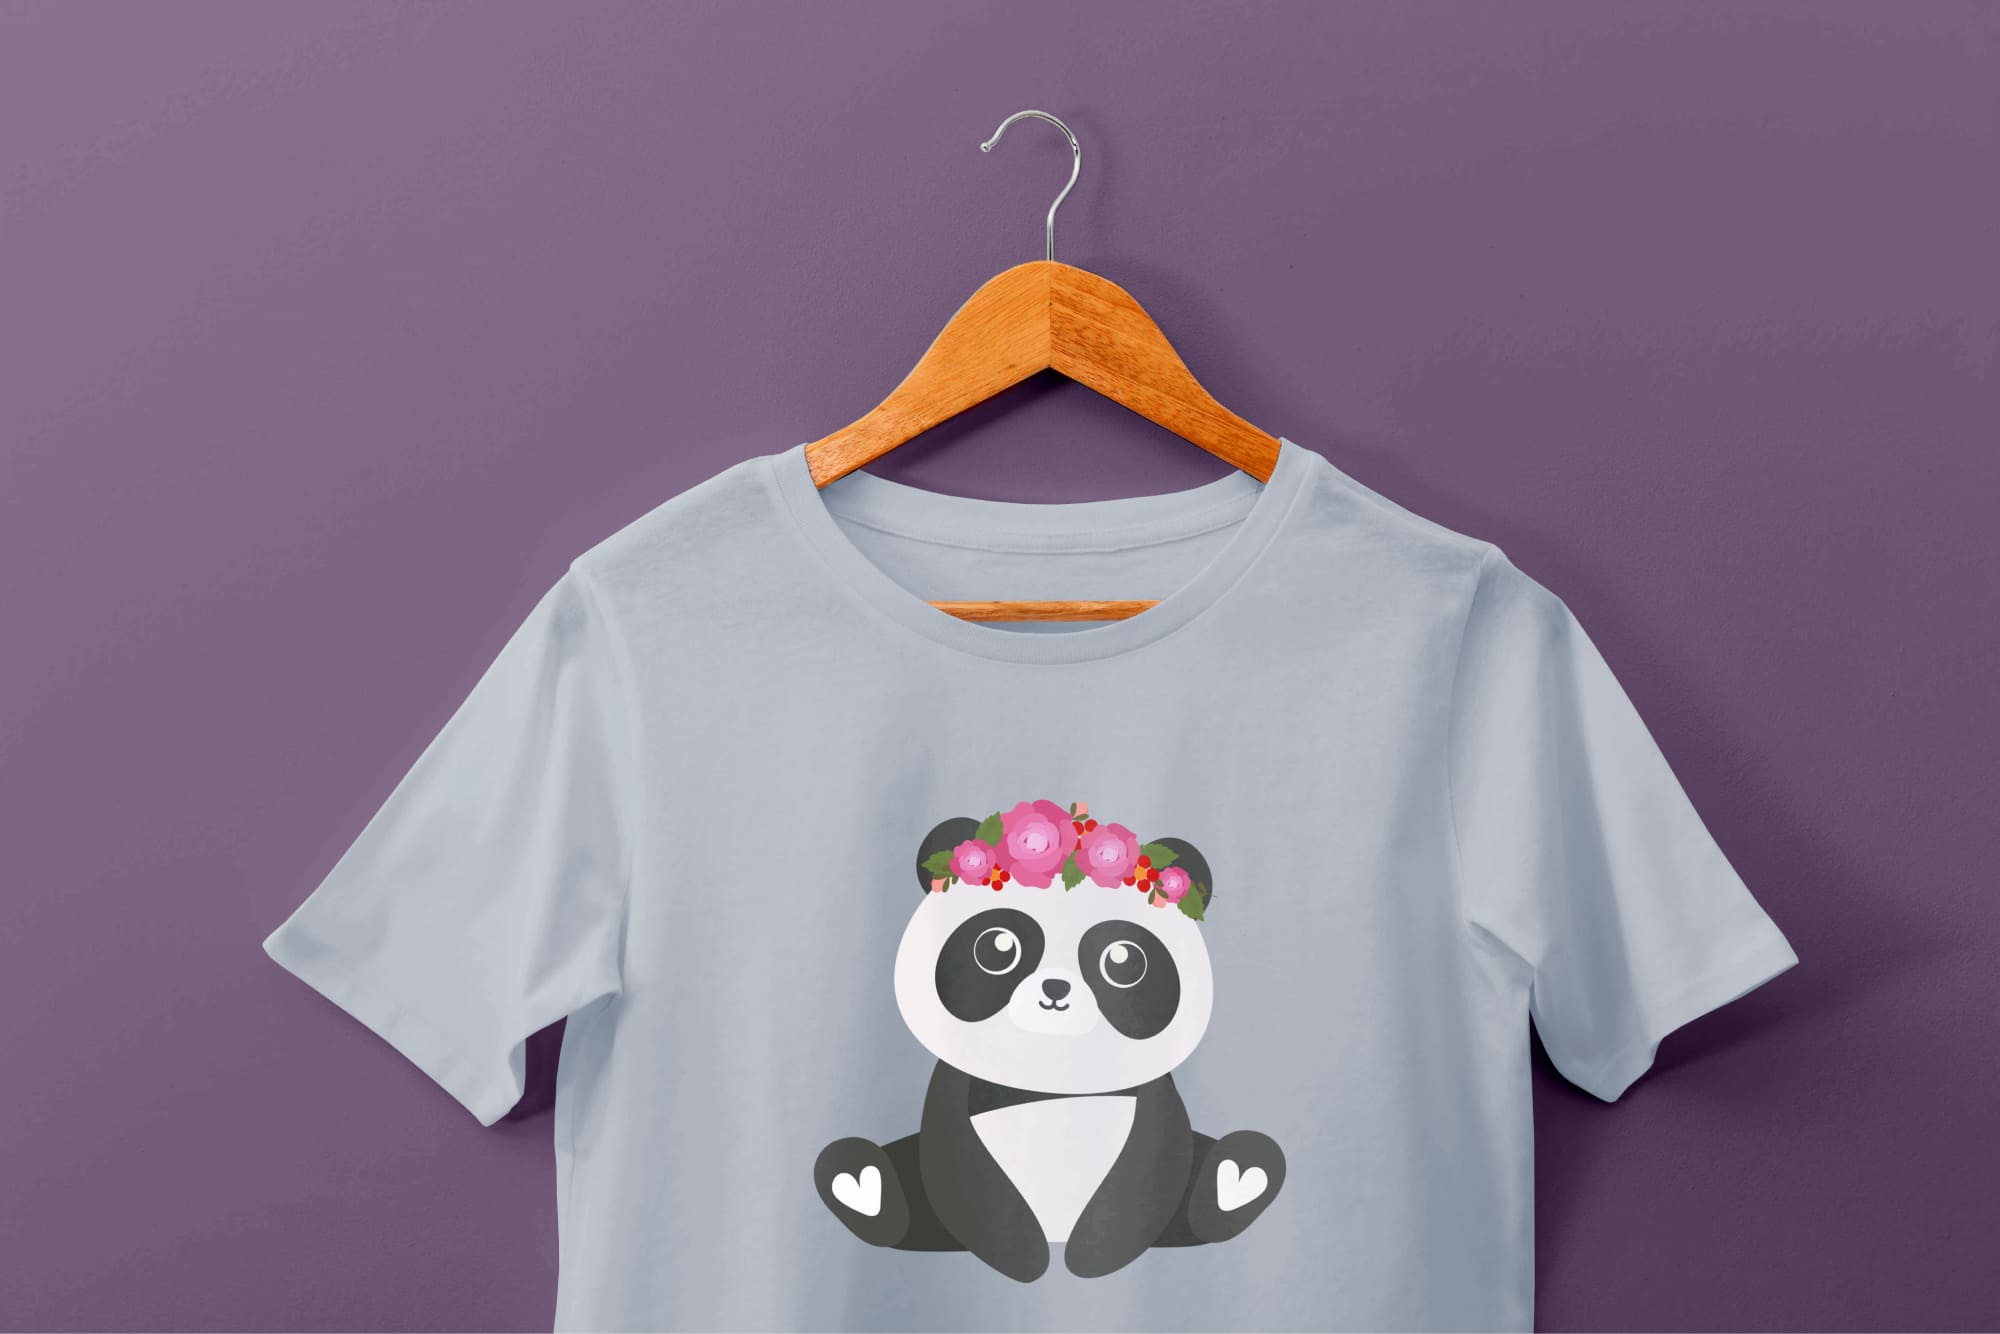 Light blue t-shirt with a panda and headband of pink flowers on a hanger on a purple background.